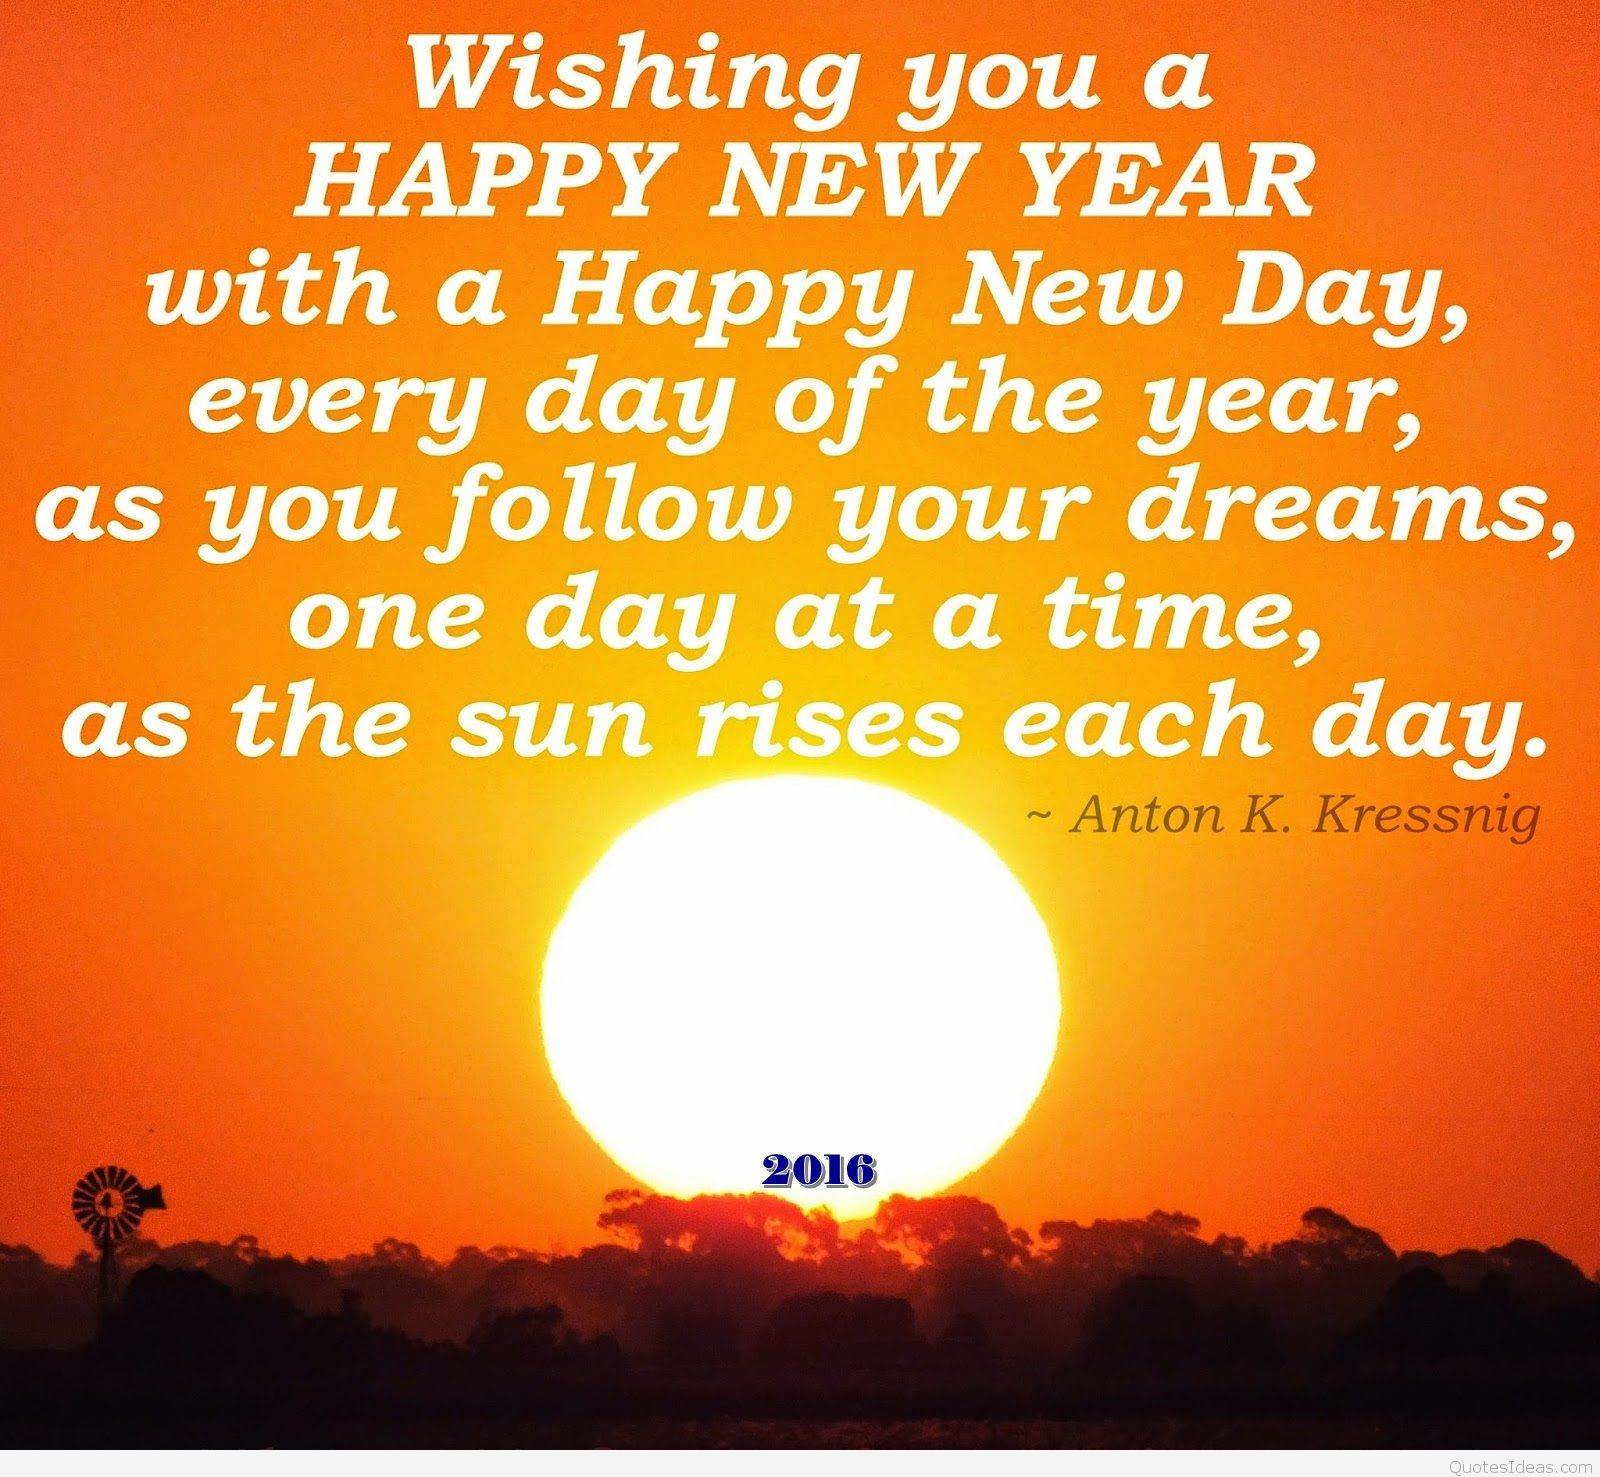 Funny Happy New Year Quote
 Funny Happy New Year Greetings Pics Sayings 2016